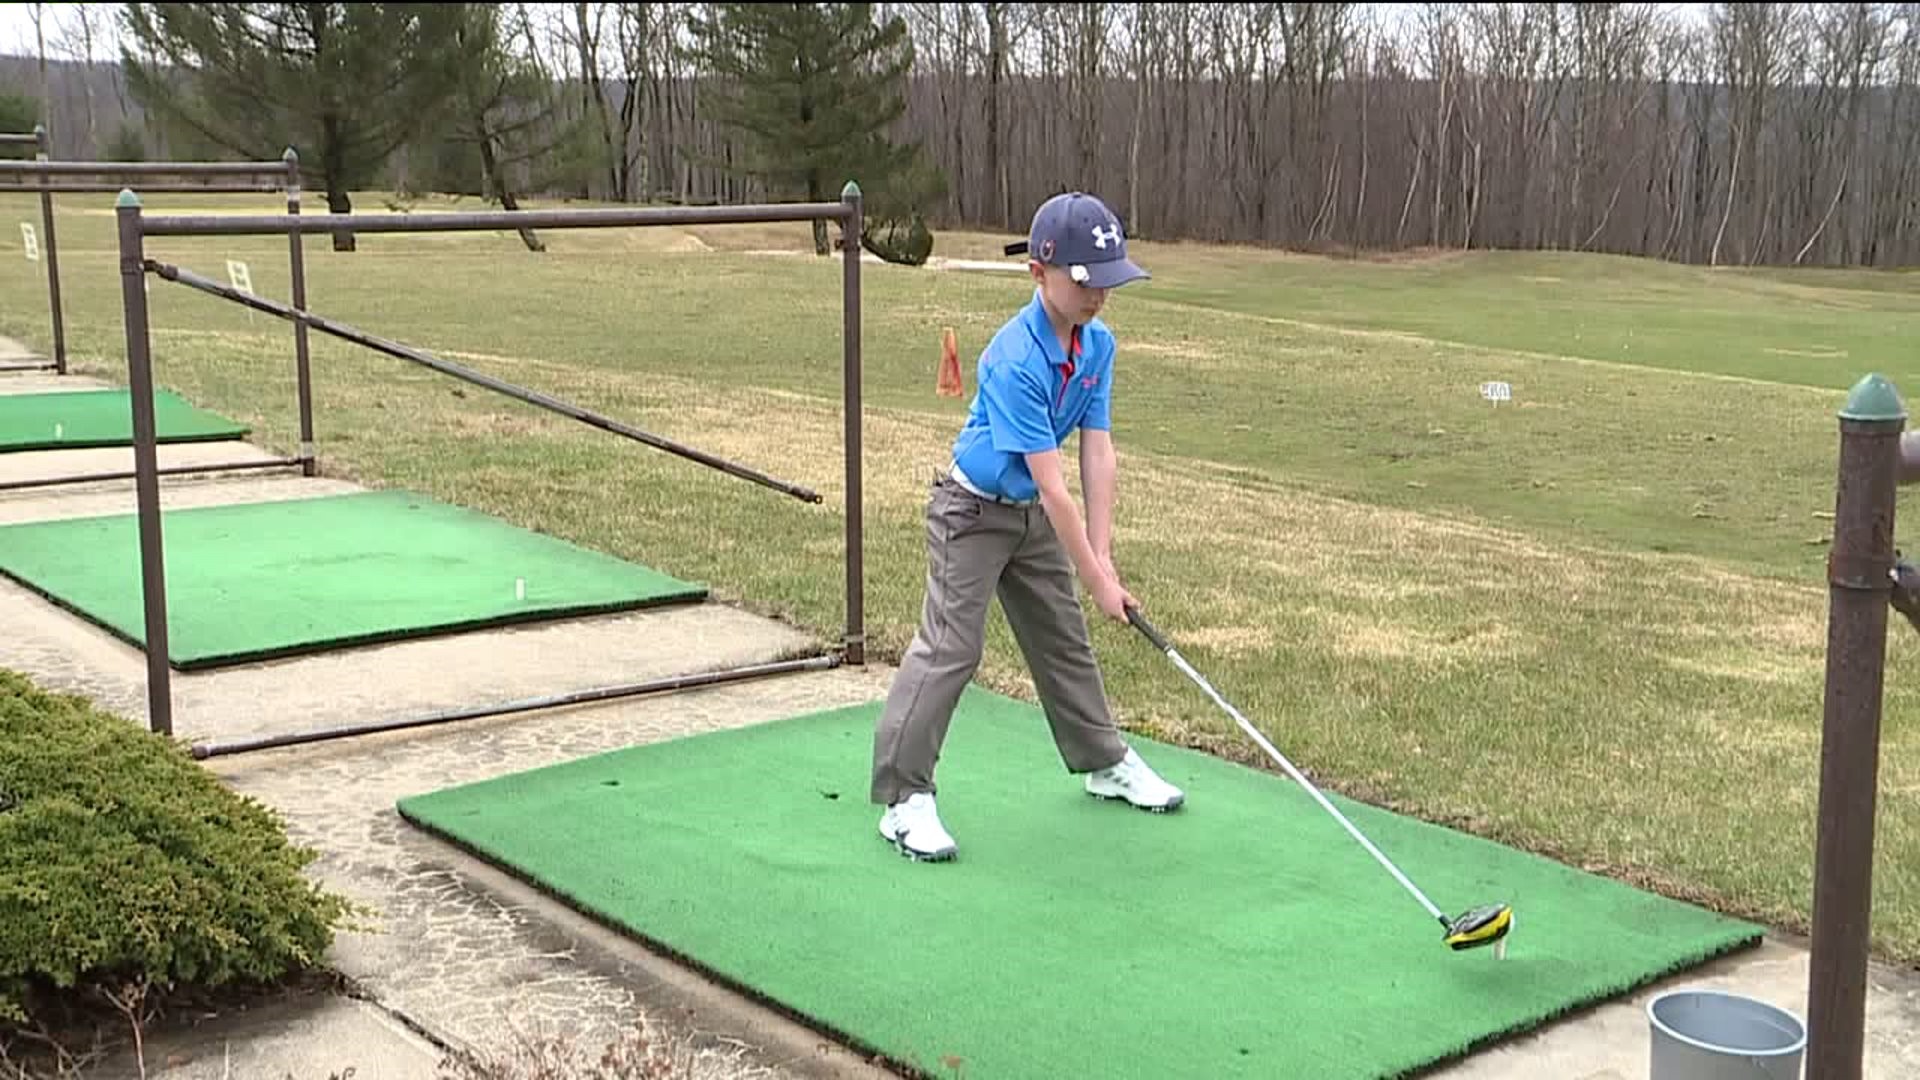 Schuylkill County: Home to One of World's Top Kid Golfers